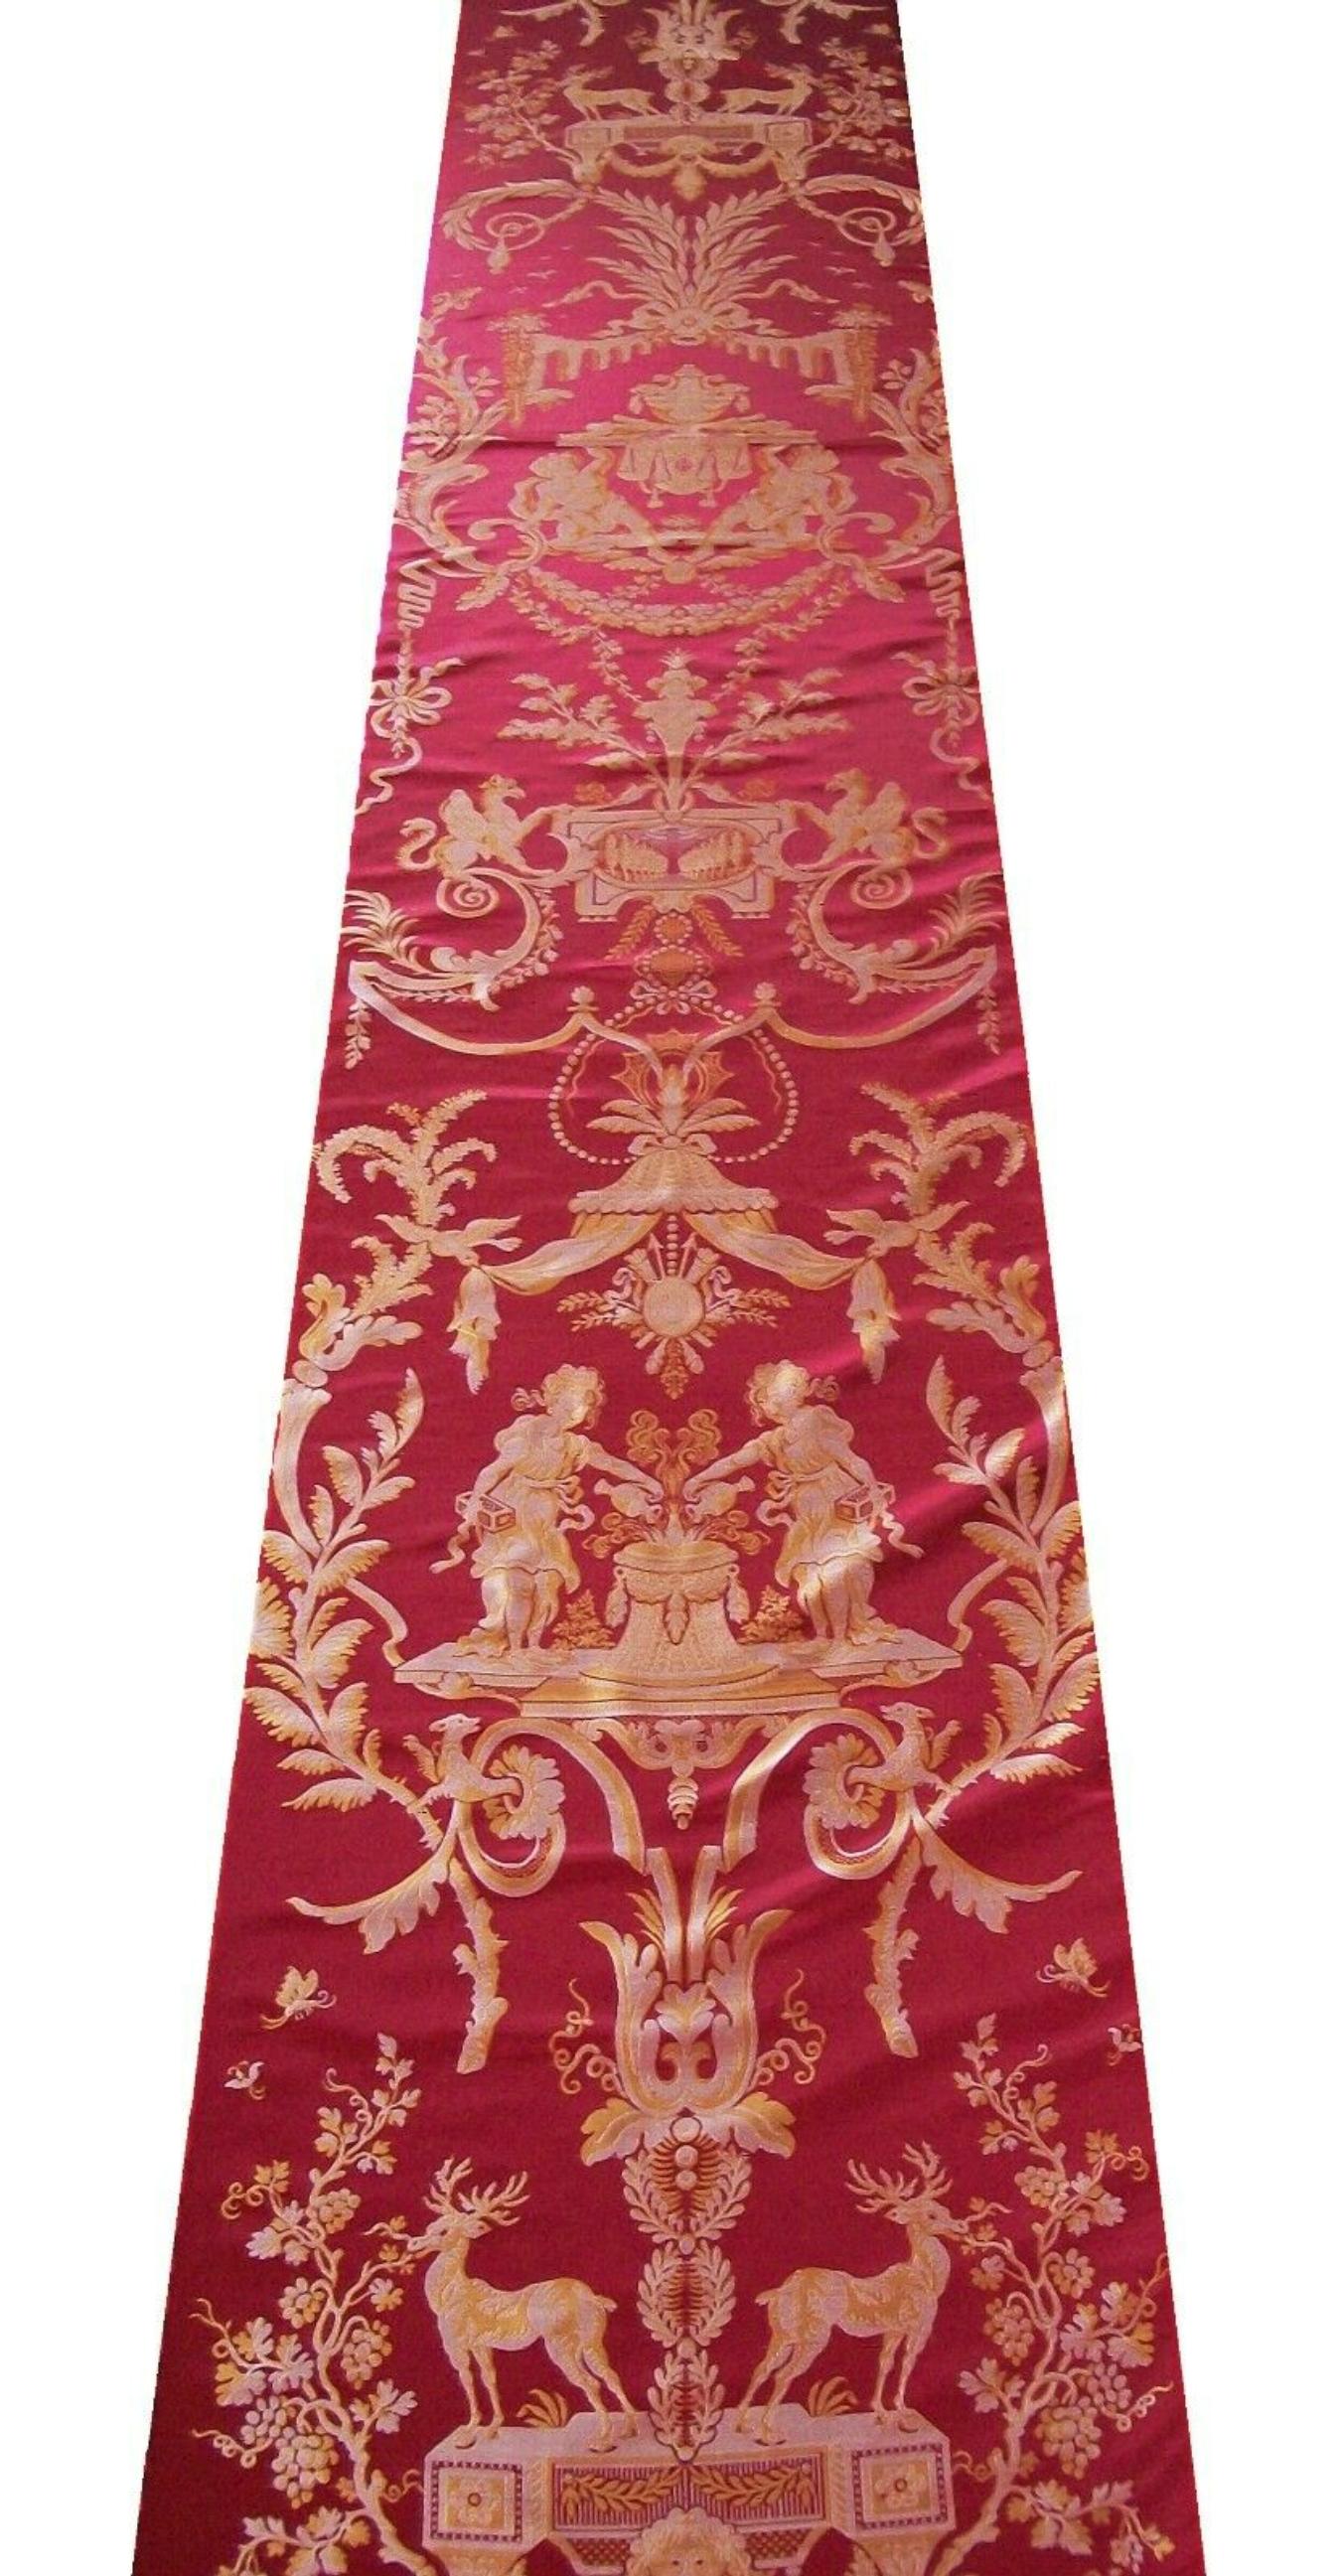 Rare and grand Venetian Renaissance style silk brocade panels (two panels per length - total of three sets available as one continuous length or sold separately) - opulent woven pattern featuring columns of animals and figures neatly stacked on